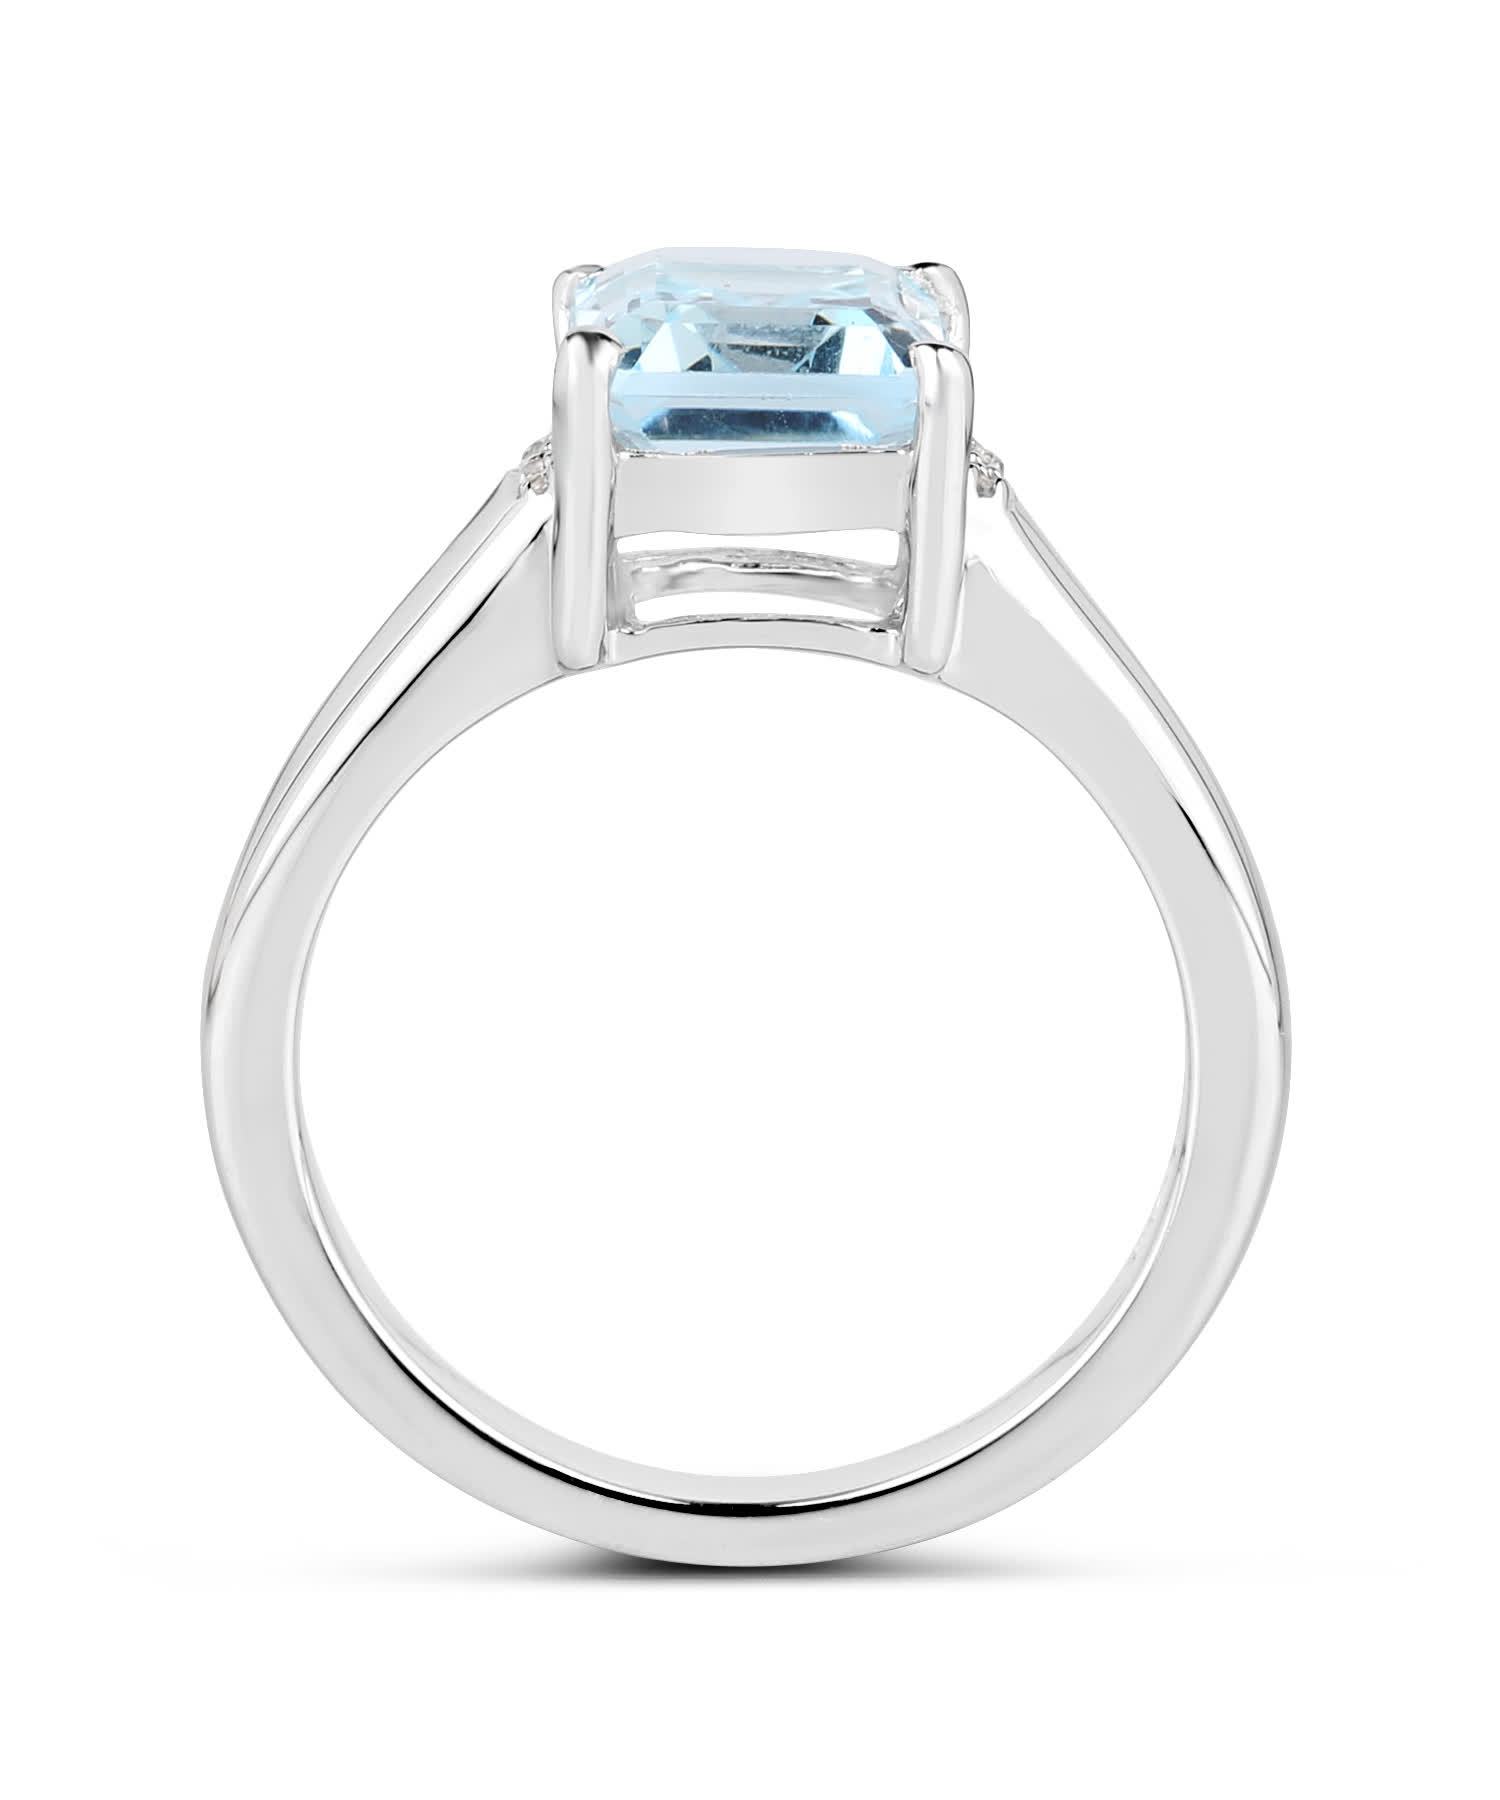 2.64ctw Natural Sky Blue Topaz Rhodium Plated 925 Sterling Silver Right Hand Ring View 2